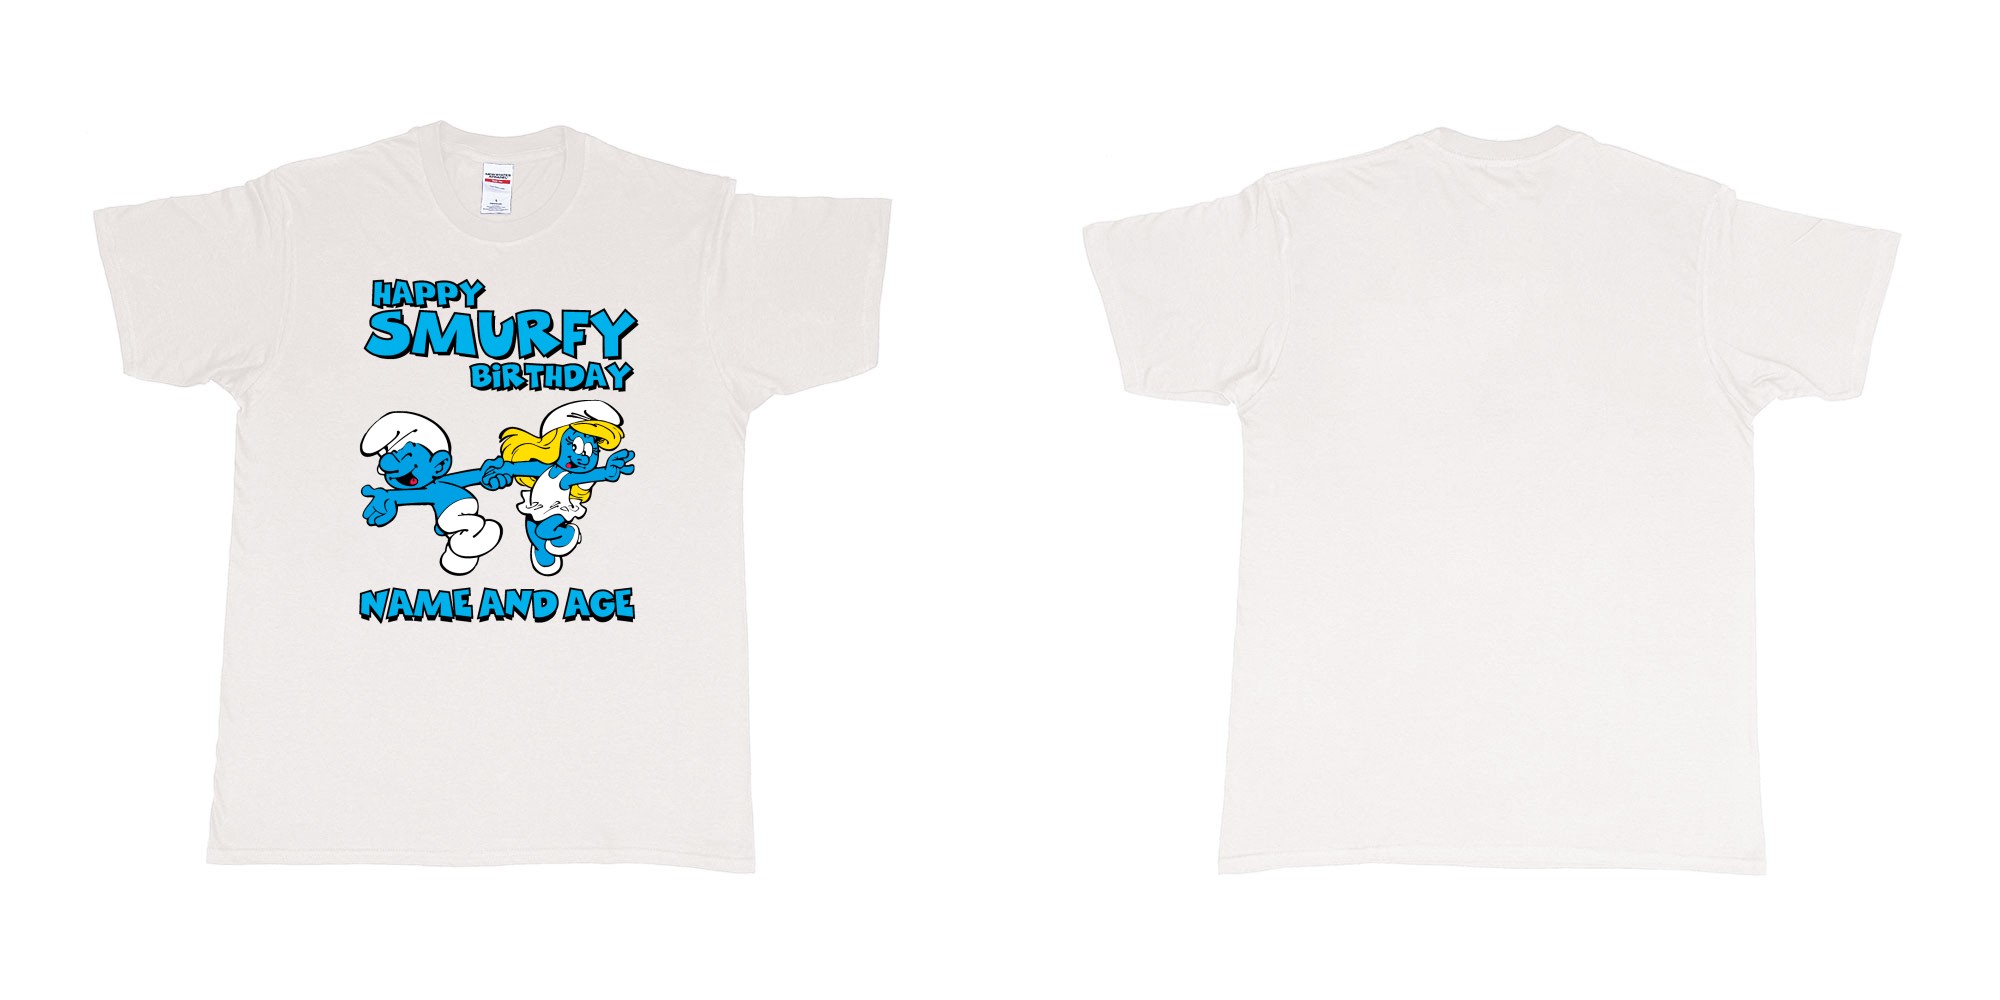 Custom tshirt design happy smurfy birthday in fabric color white choice your own text made in Bali by The Pirate Way